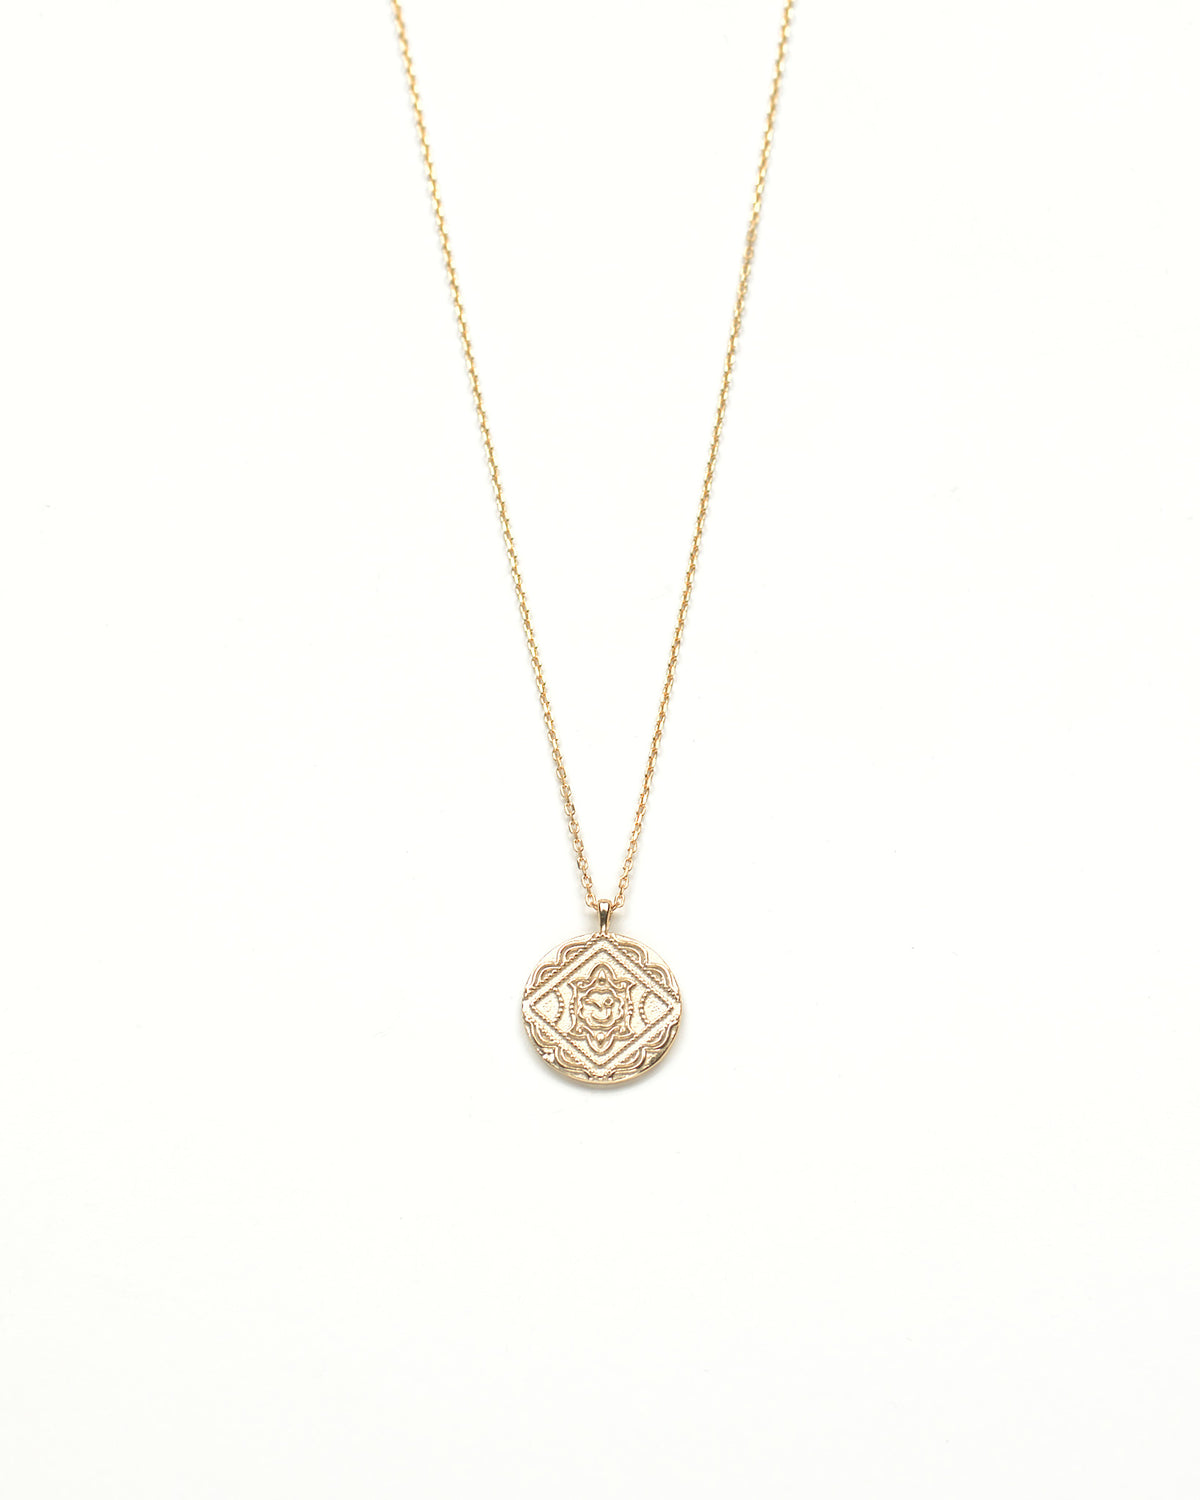 18k gold plated sterling silver medallion and necklace trendy affordable minimalist demifine